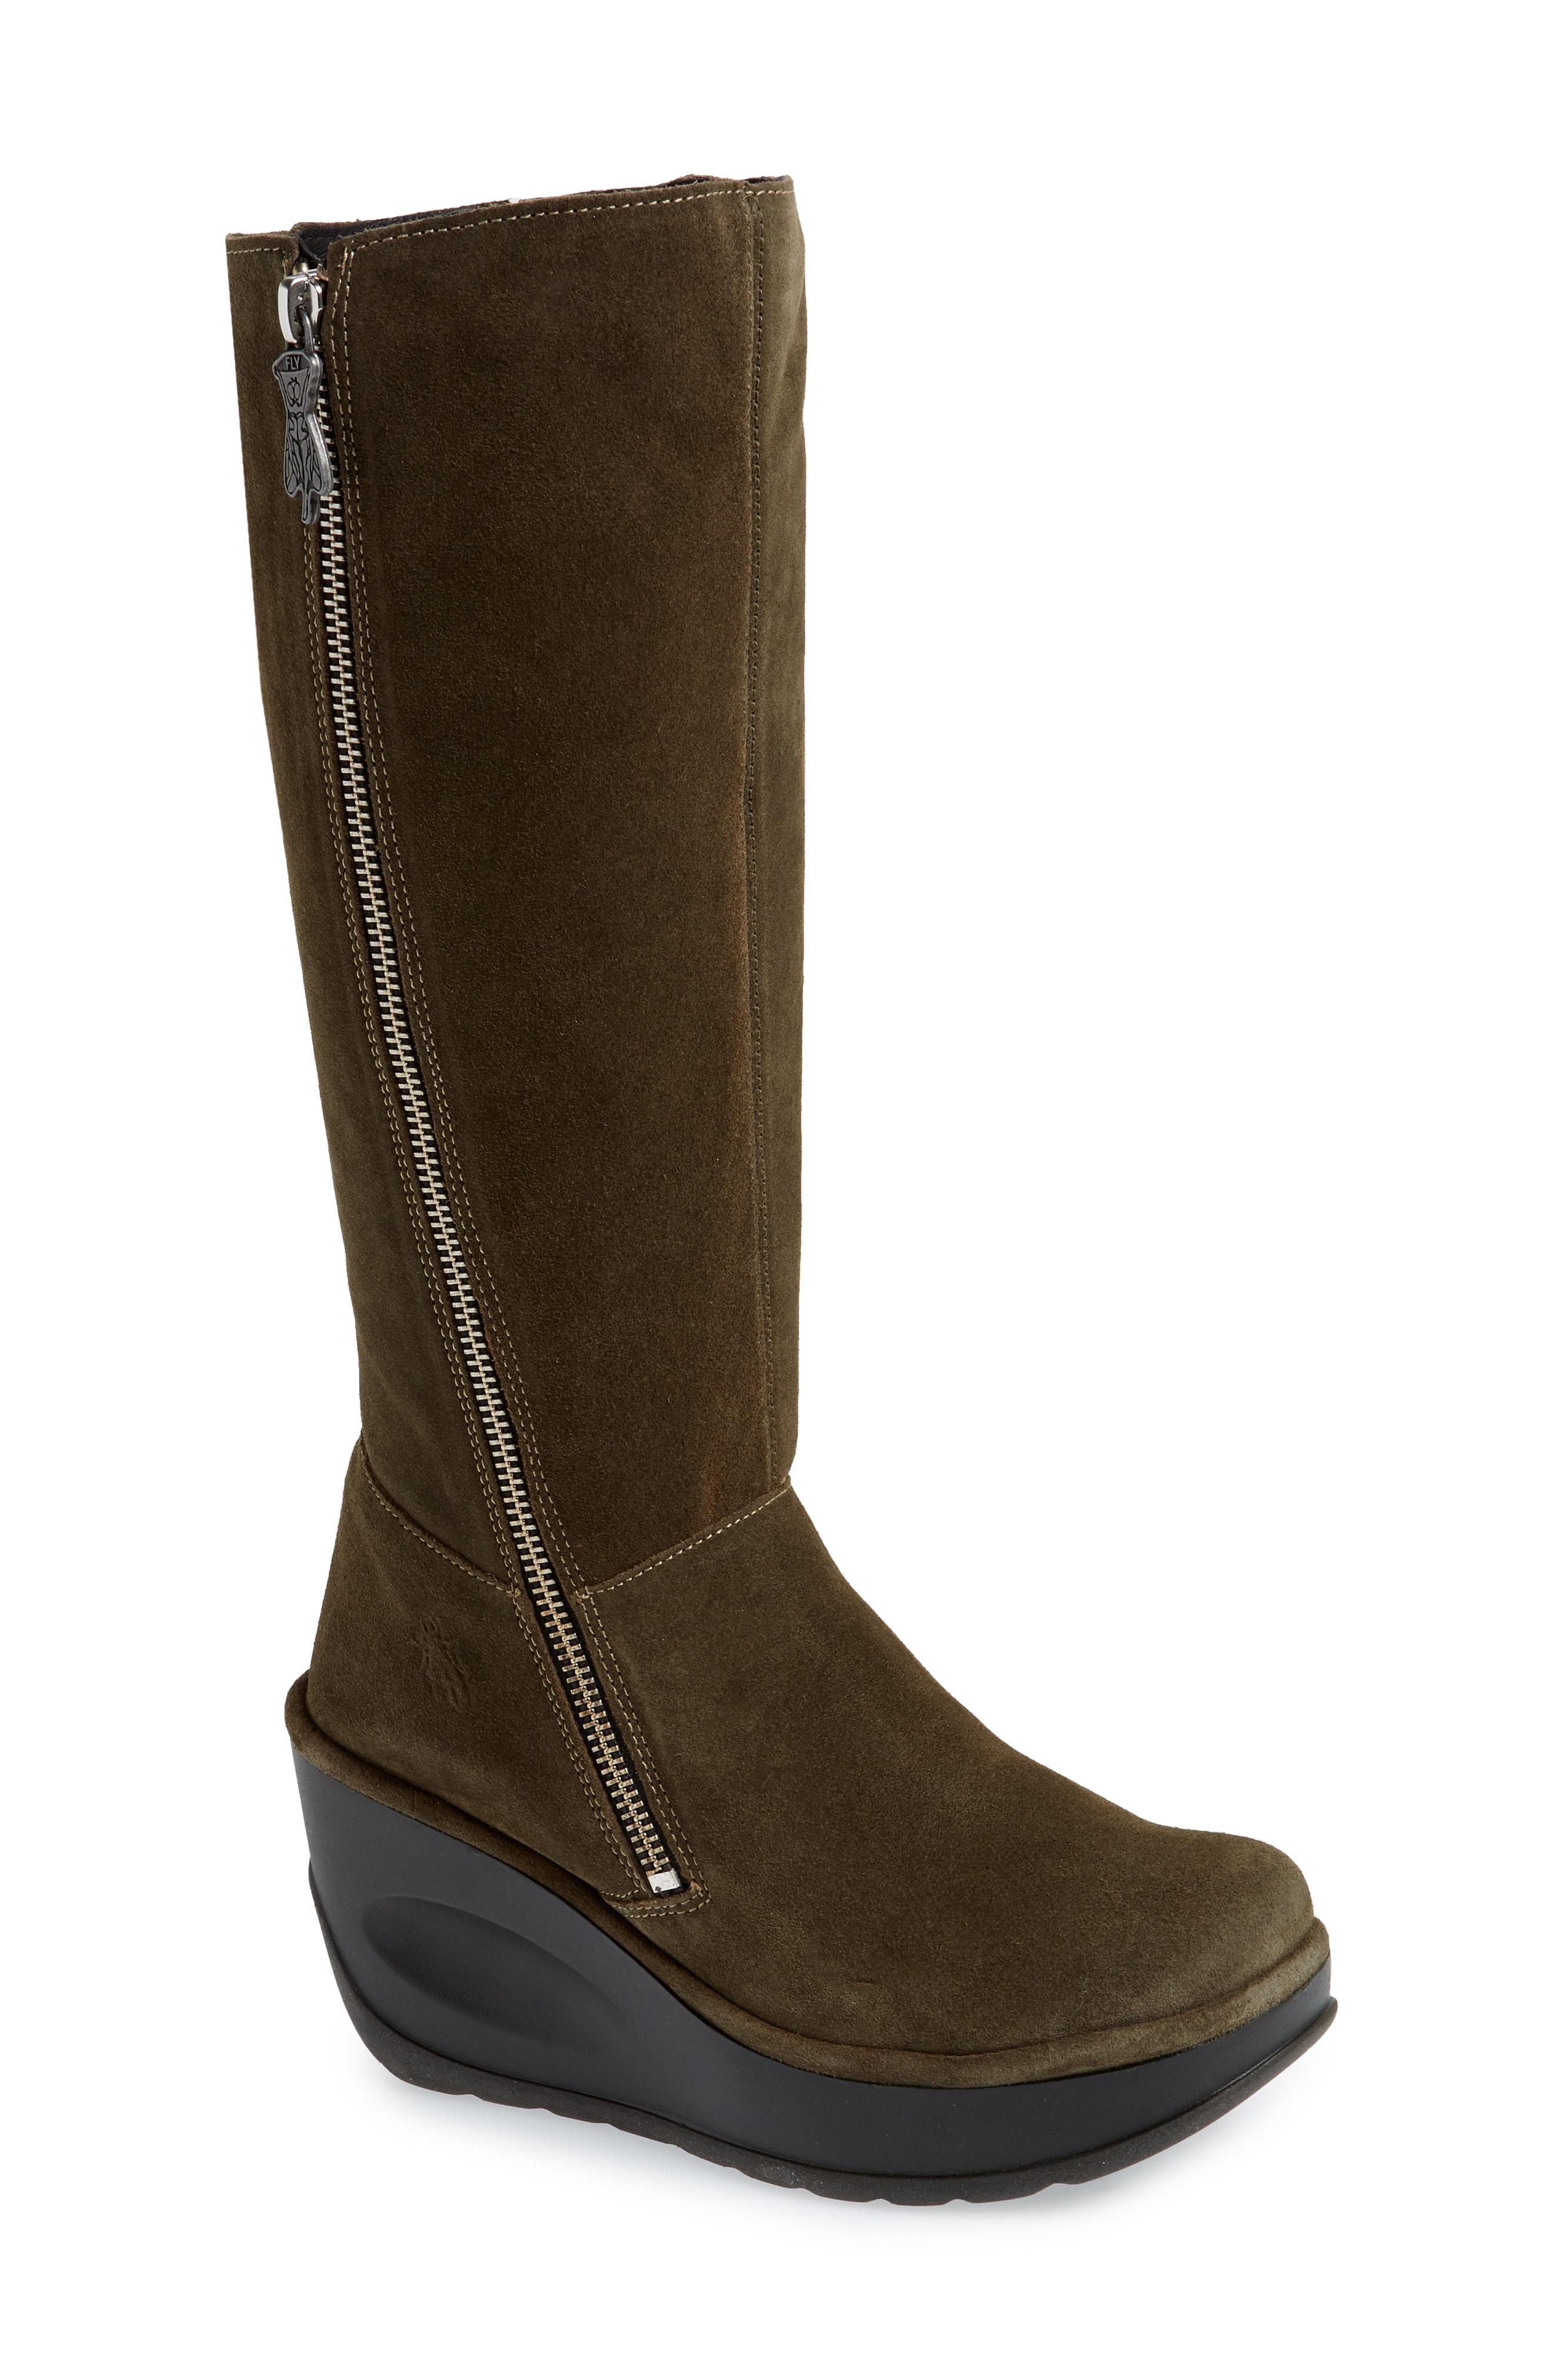 Fly London Jate Wedge Boot in Brown - Lyst